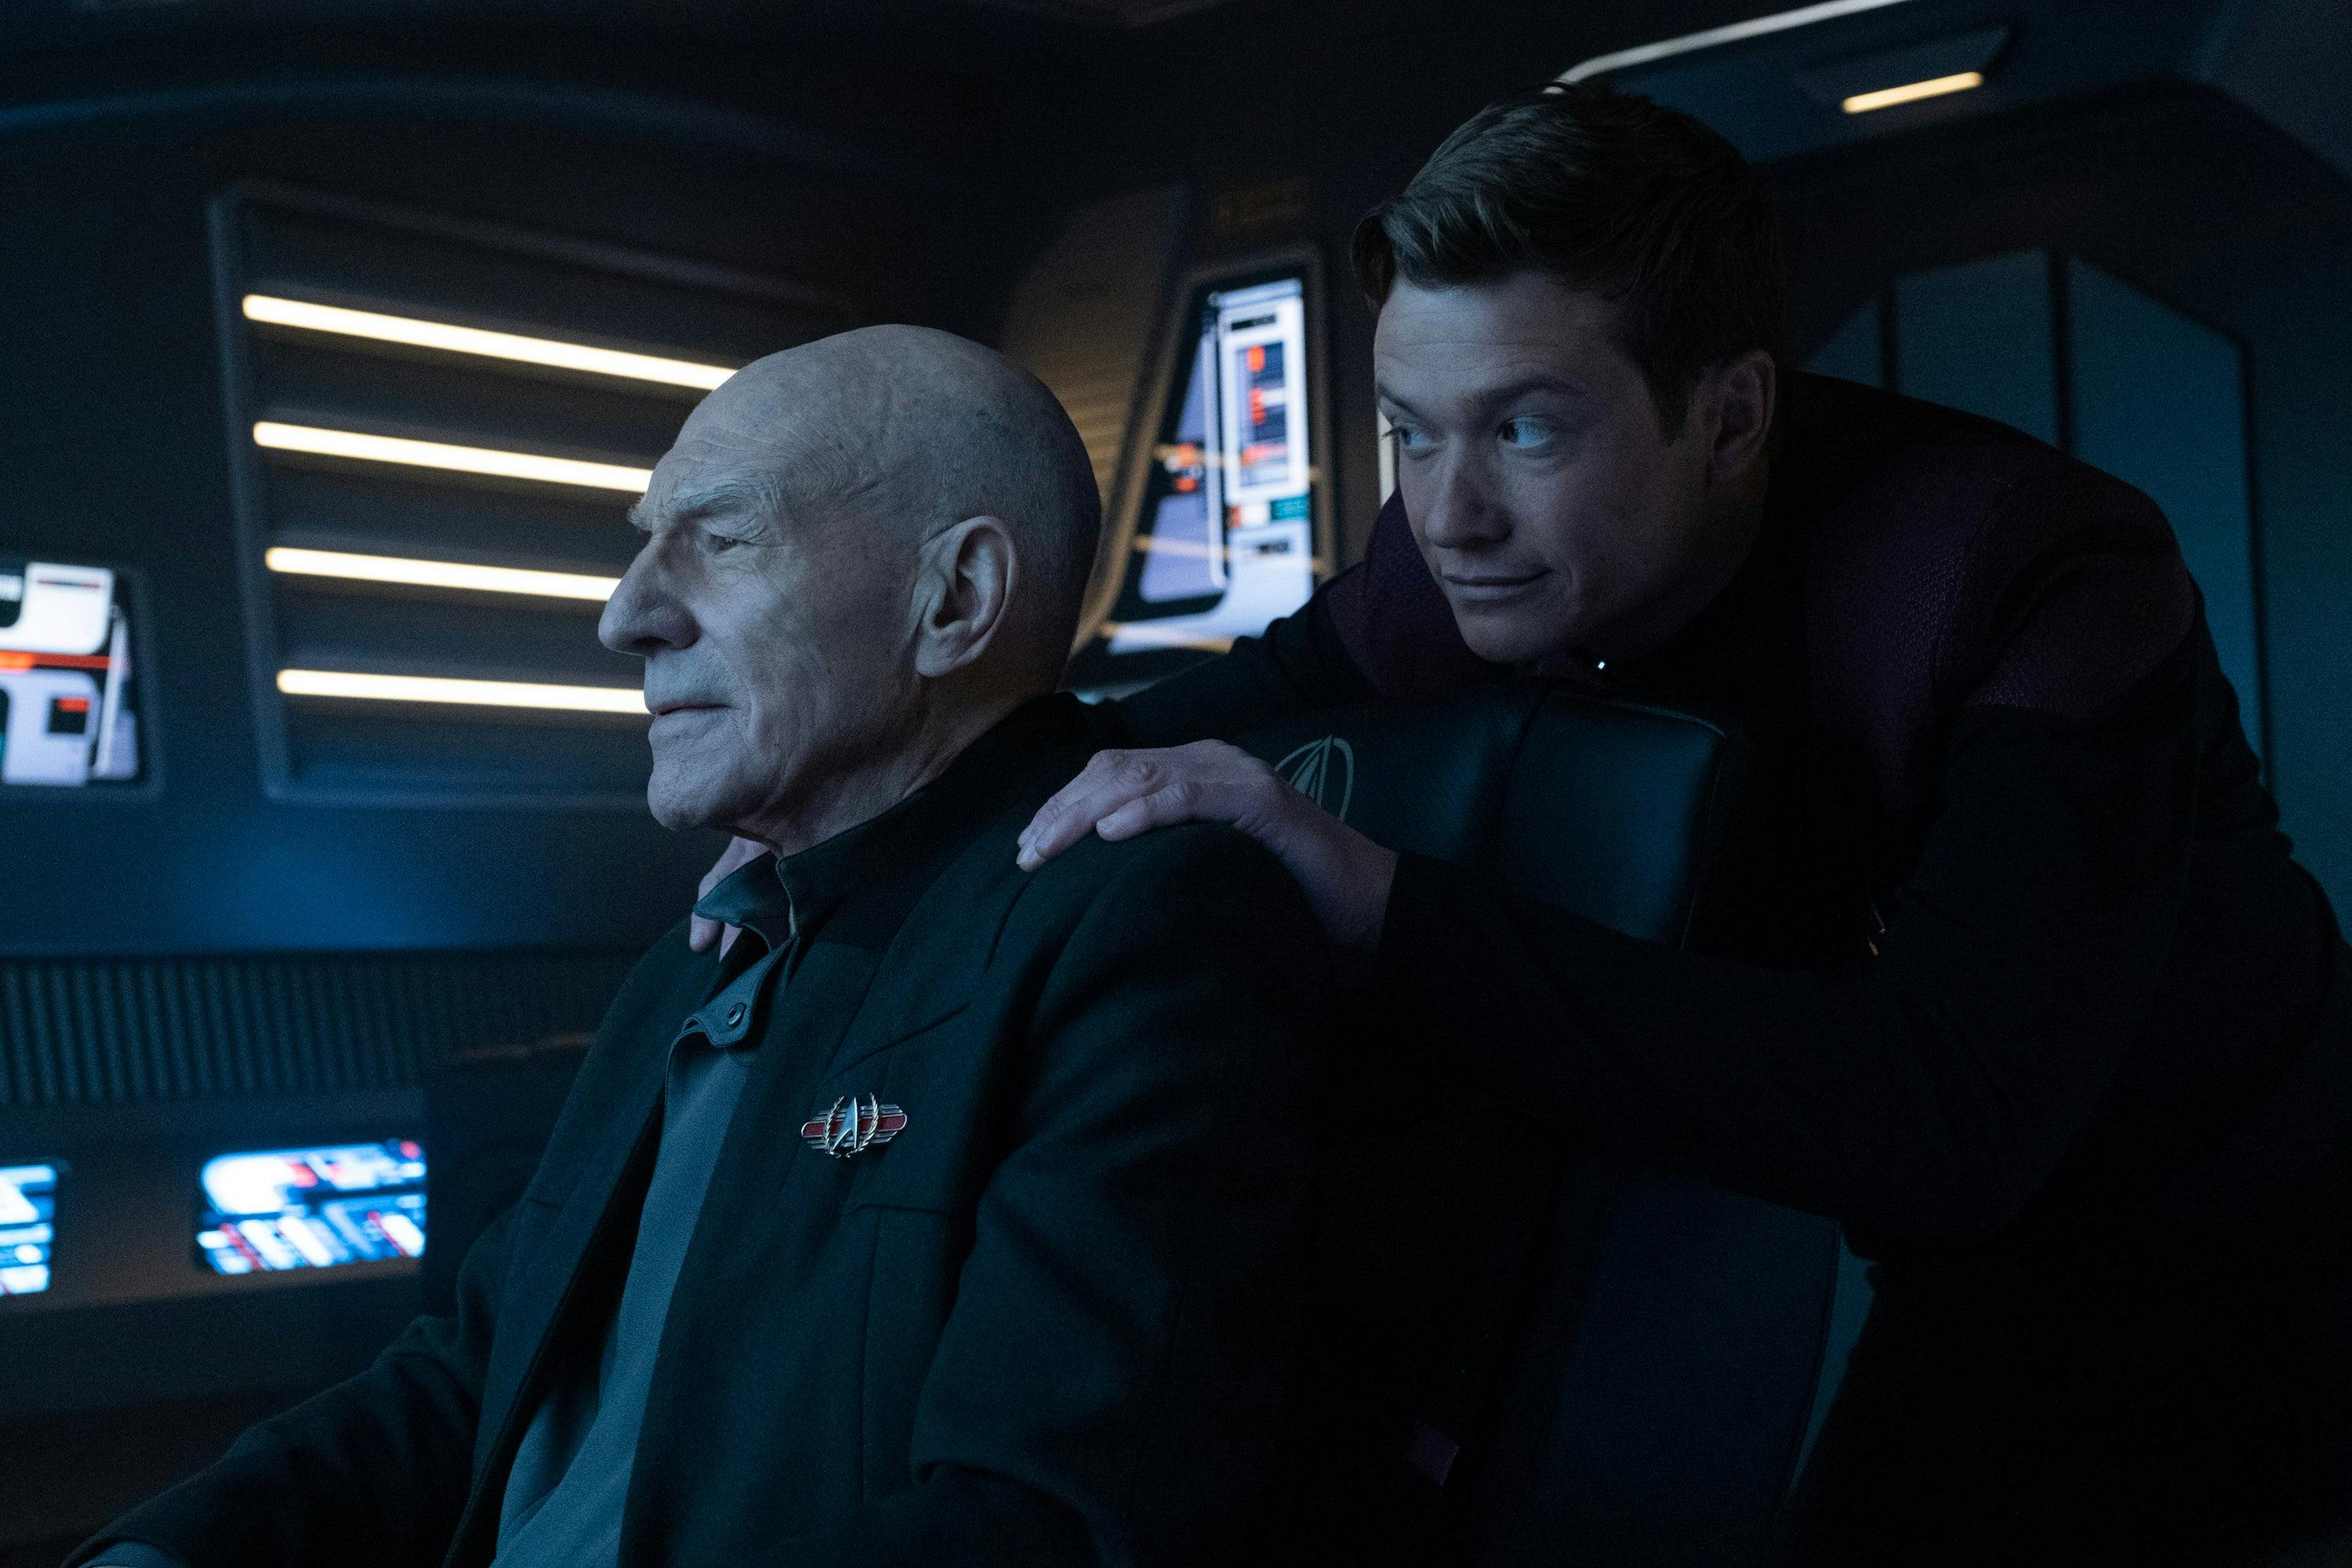 On a shuttle, Jean-Luc Picard looks ahead, touched by what he sees, as Jack Crusher crouches behind him with his hands on his father's shoulders in 'The Last Generation'